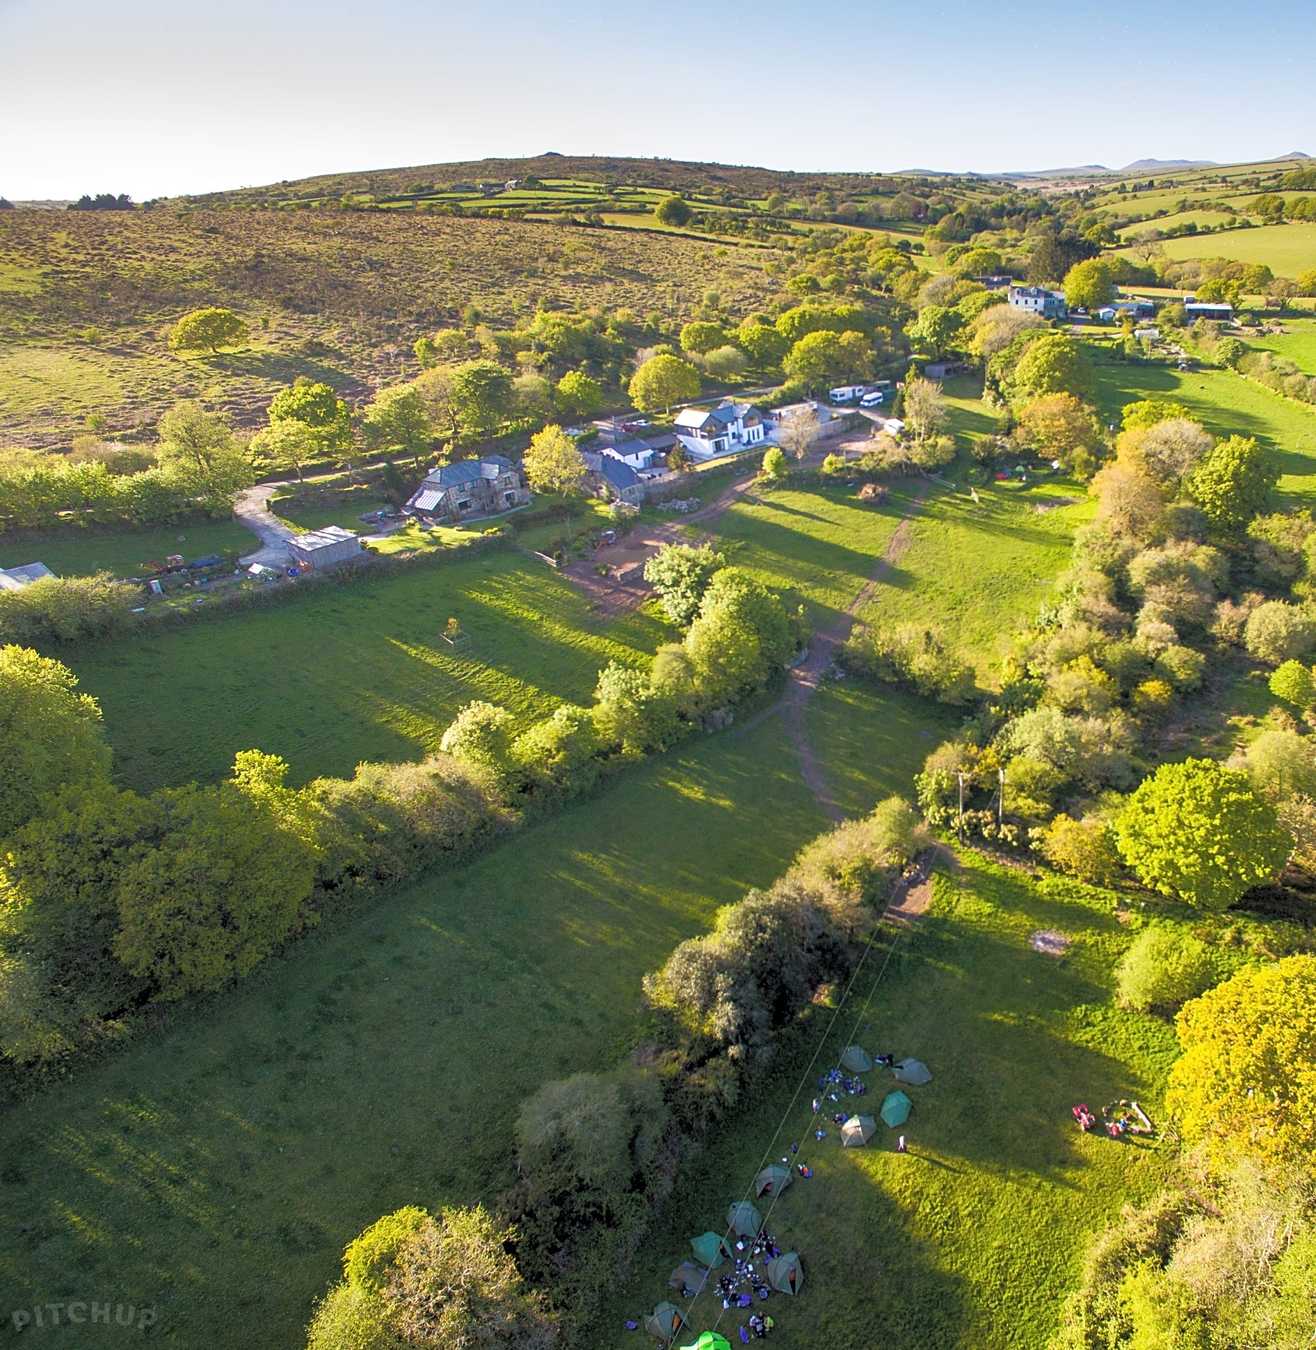 Surround yourself with lovely scenery at Bodmin Moor Camping